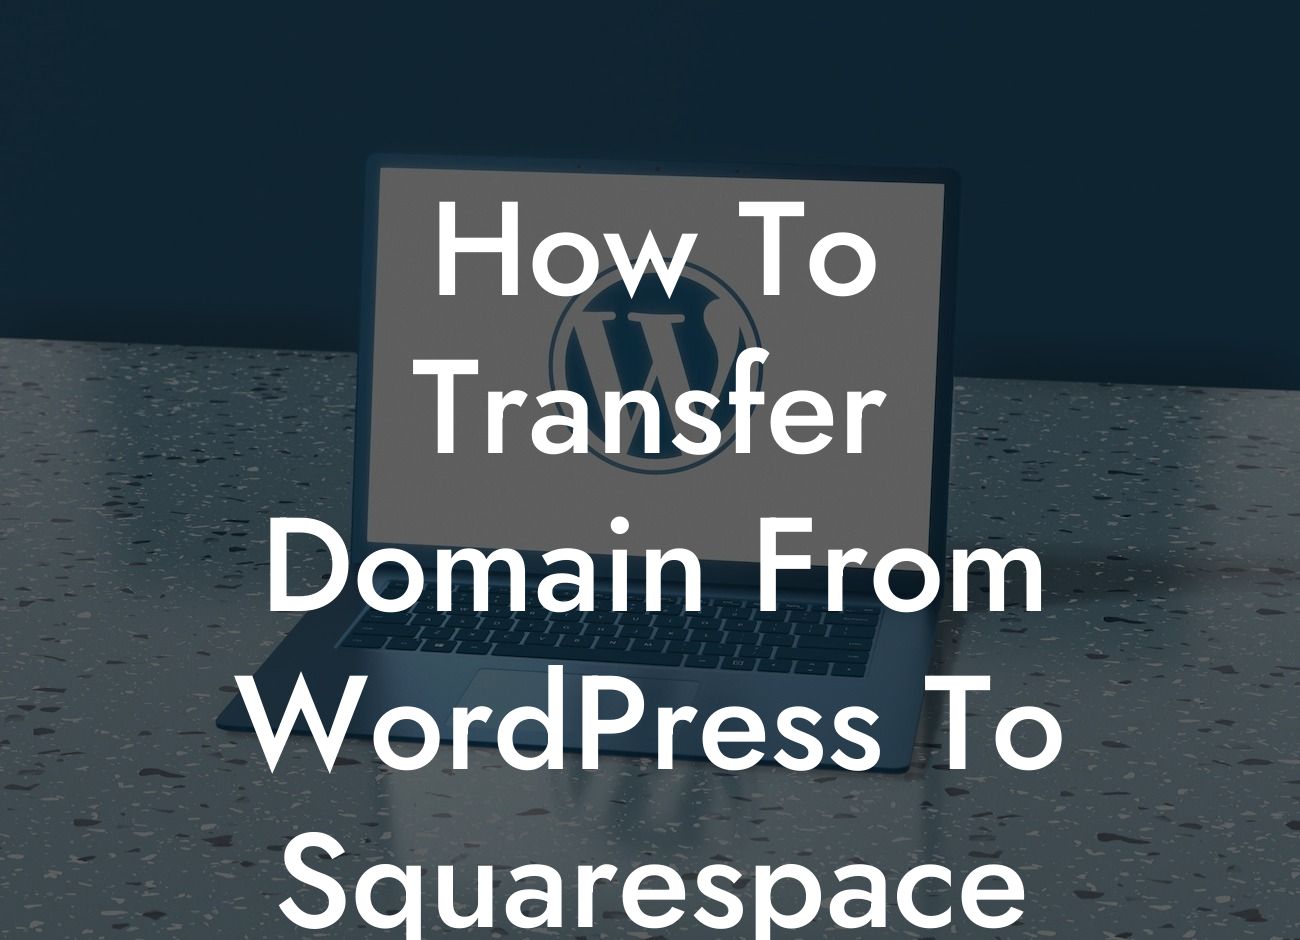 How To Transfer Domain From WordPress To Squarespace